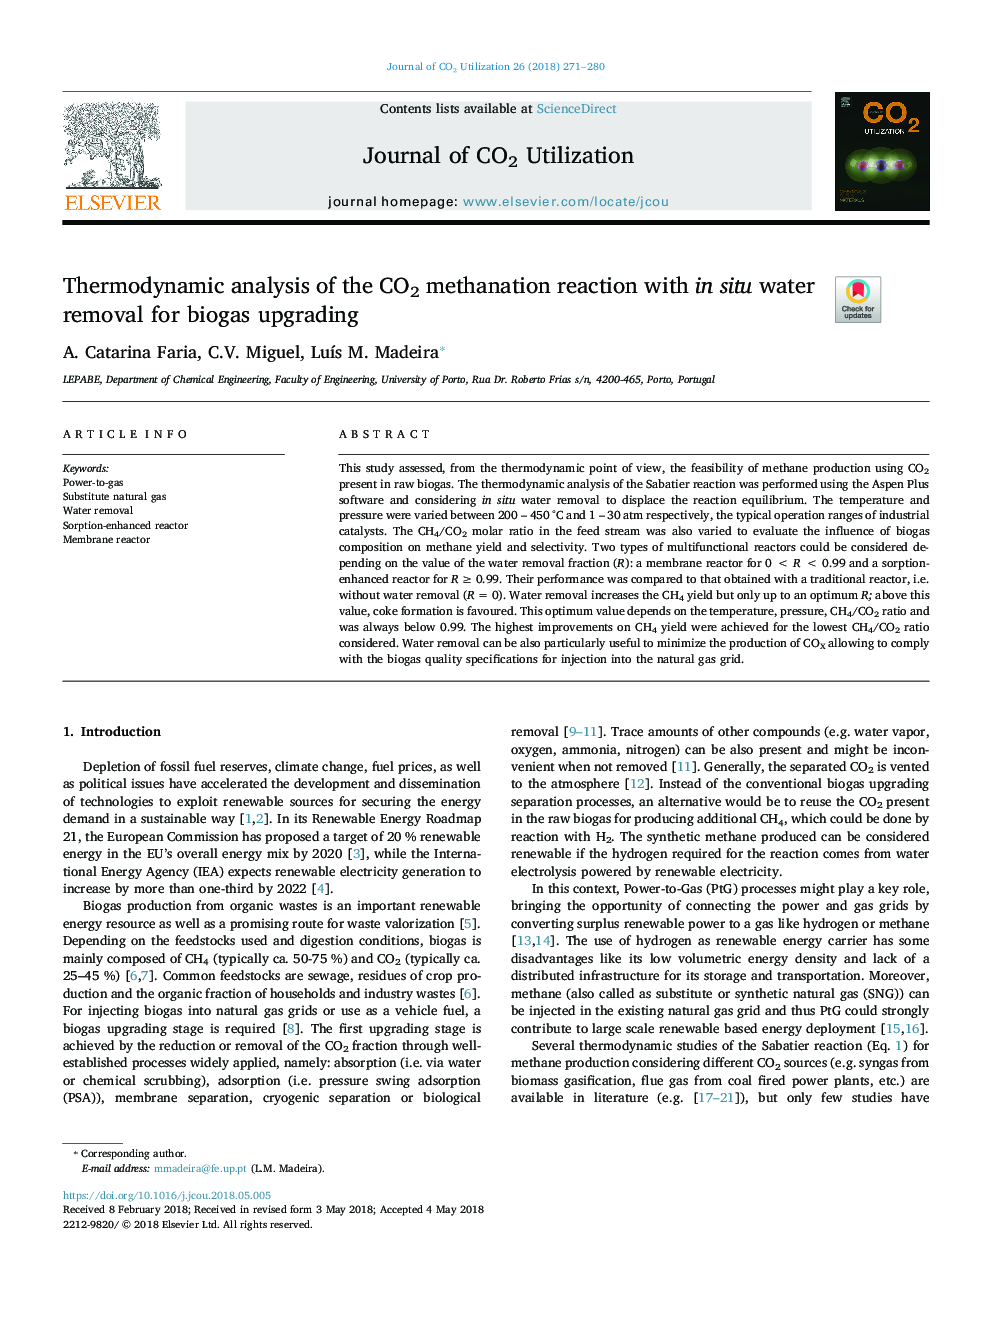 Thermodynamic analysis of the CO2 methanation reaction with in situ water removal for biogas upgrading